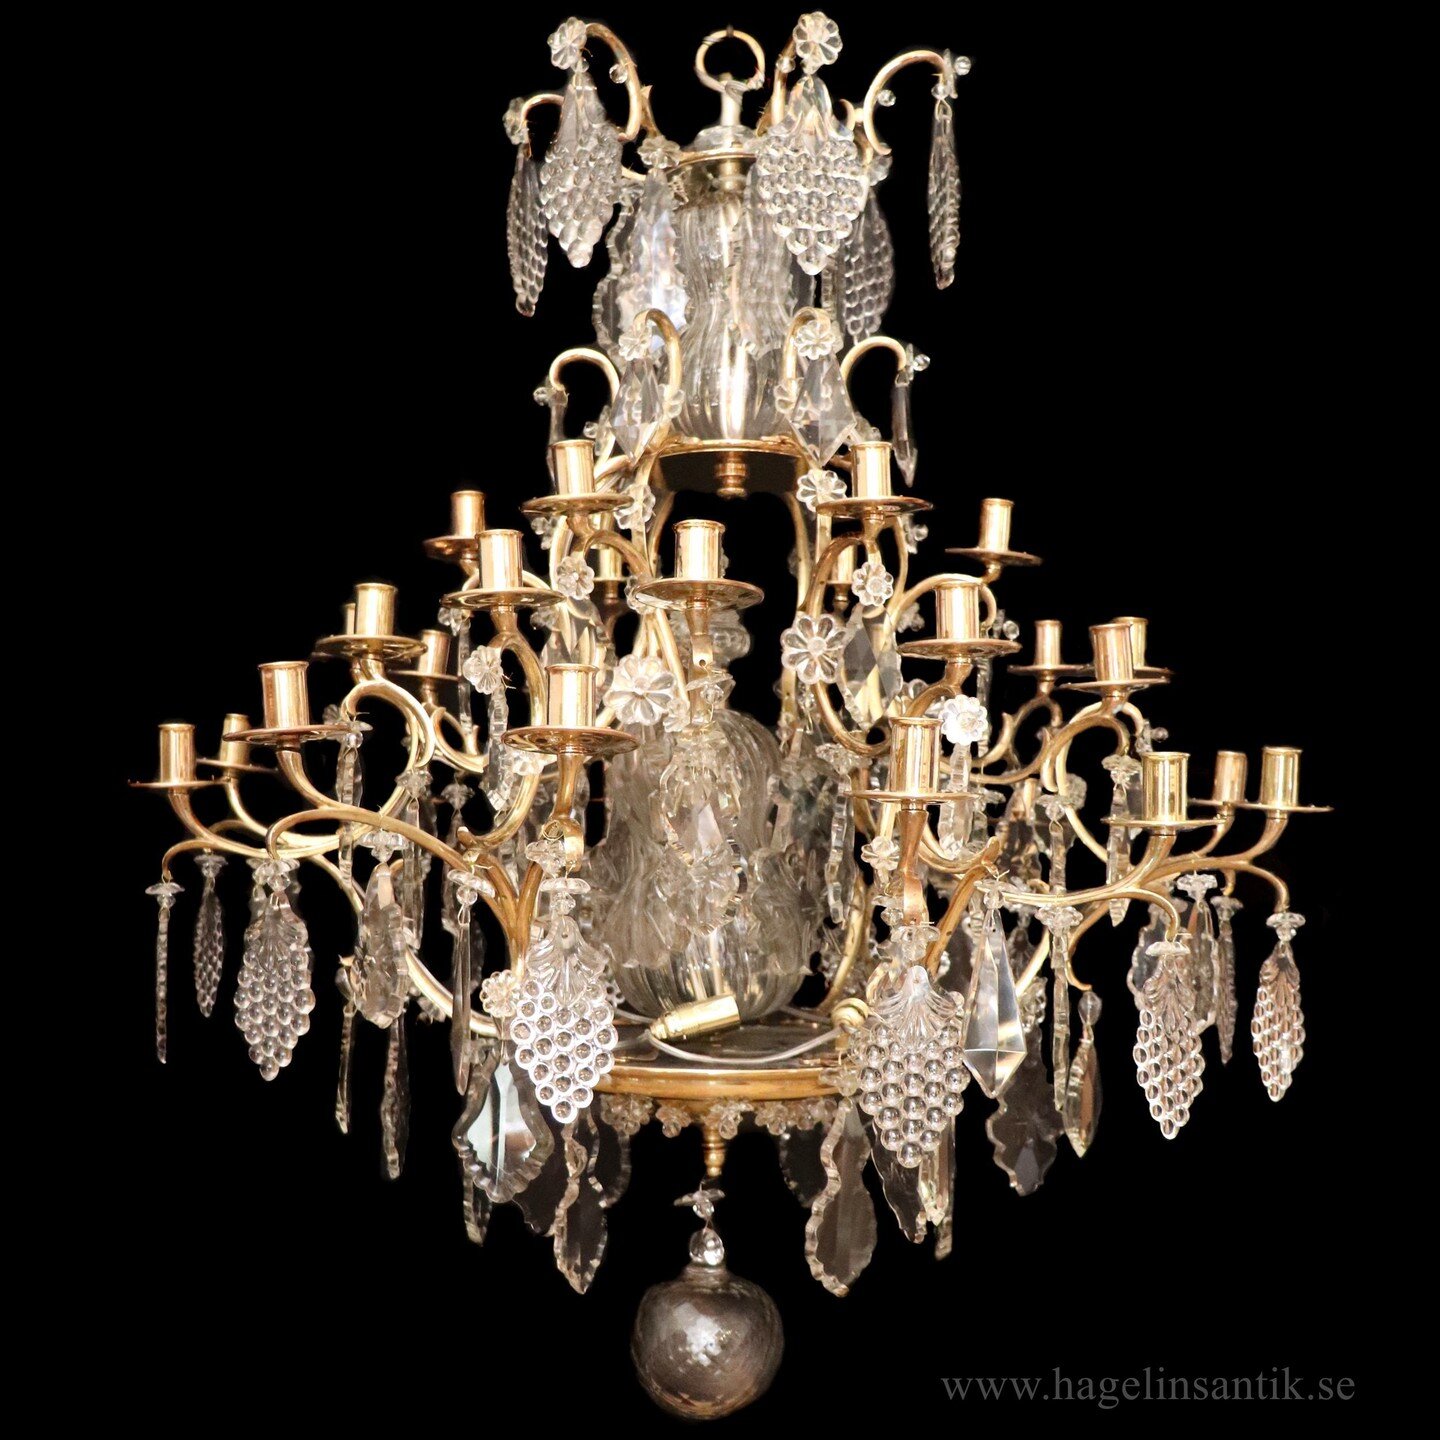 Impressive Rococo style chandelier. Swedish Ca 1890 with Bohemian crystal. Room for 30! Candle lights an 1 meter wide.

#rococo Rococostyle #rococorevival #chandelier #rokokostil #rokoko #louisxv #bohemiancrystal #ljuskrona #kristallkrona #kattokruun